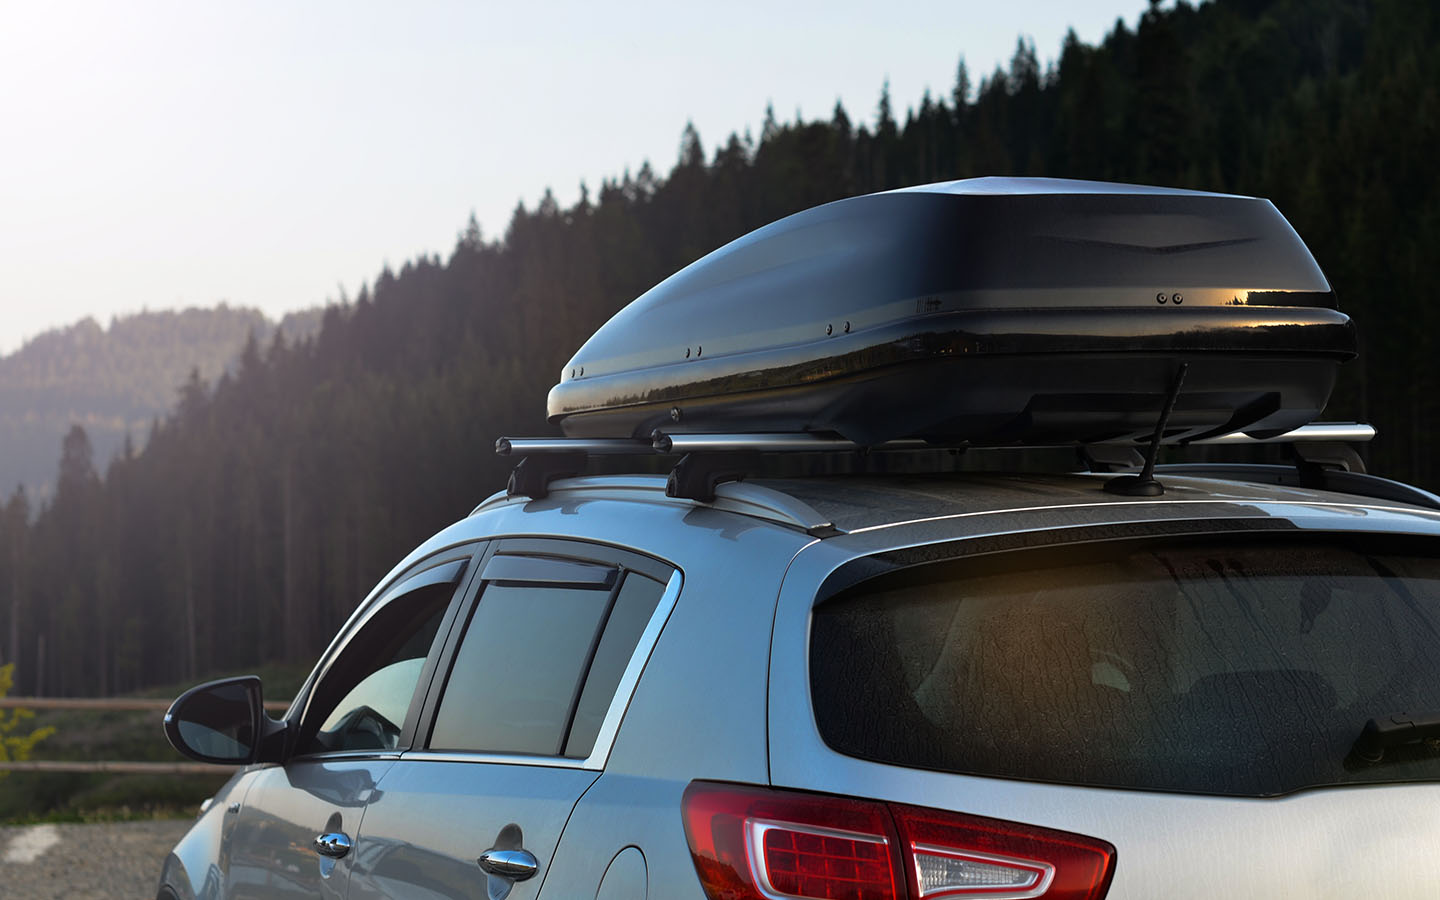 Improve Vehicle Aerodynamics by removing additional accessories such as roof racks from the vehicle